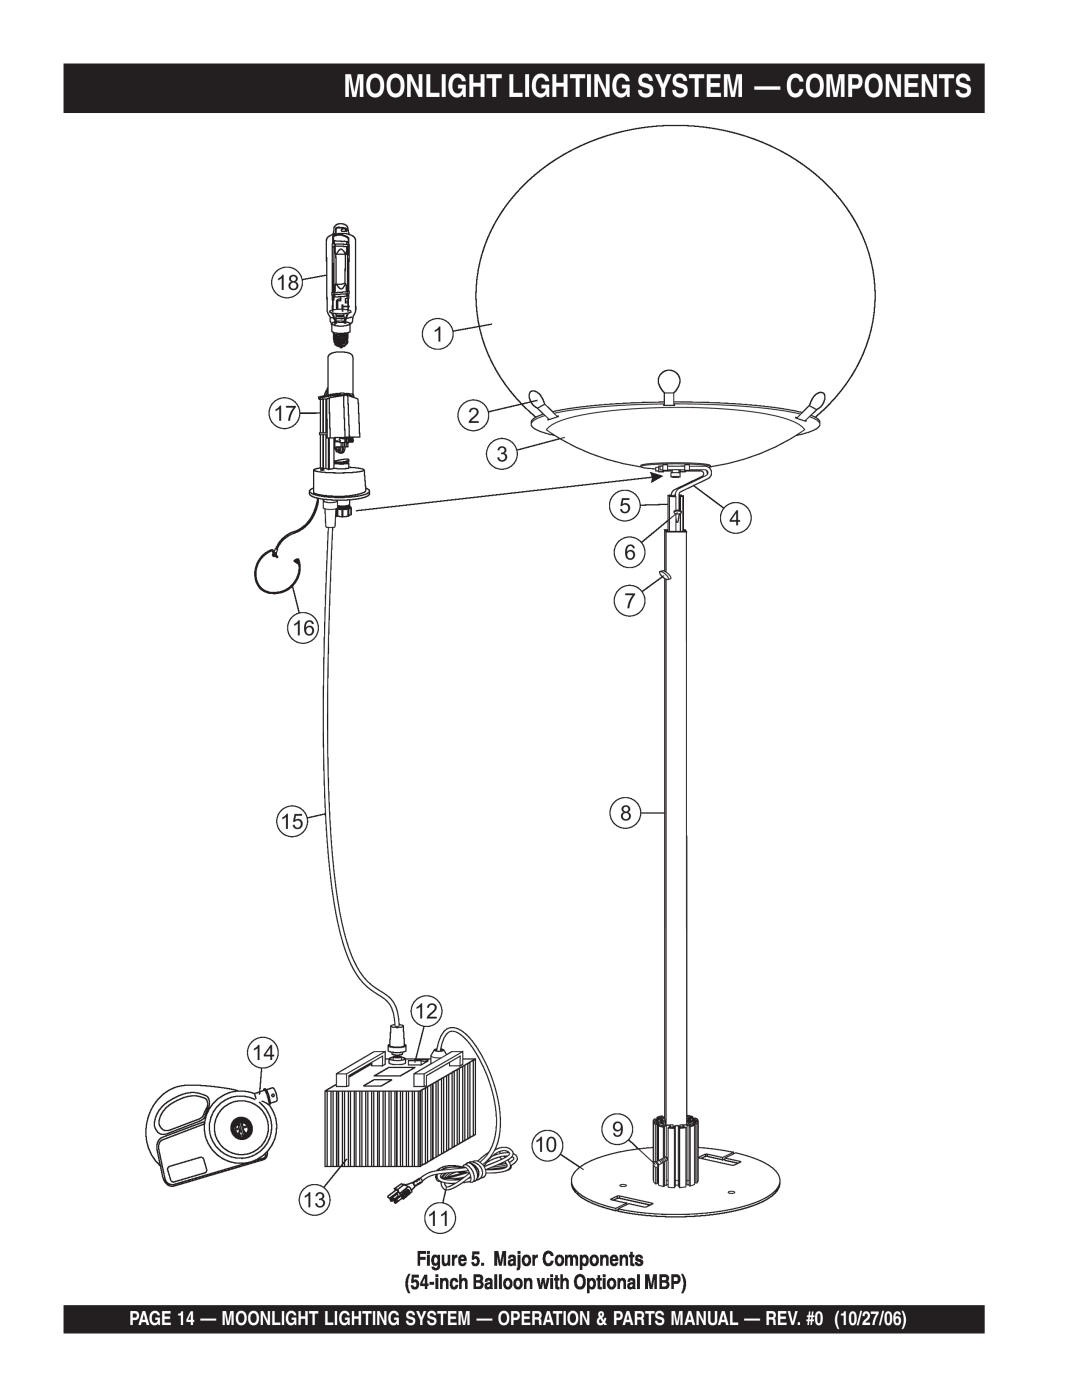 Multiquip MB1000, MB400B, MB150 Moonlight Lighting System - Components, Major Components 54-inch Balloon with Optional MBP 